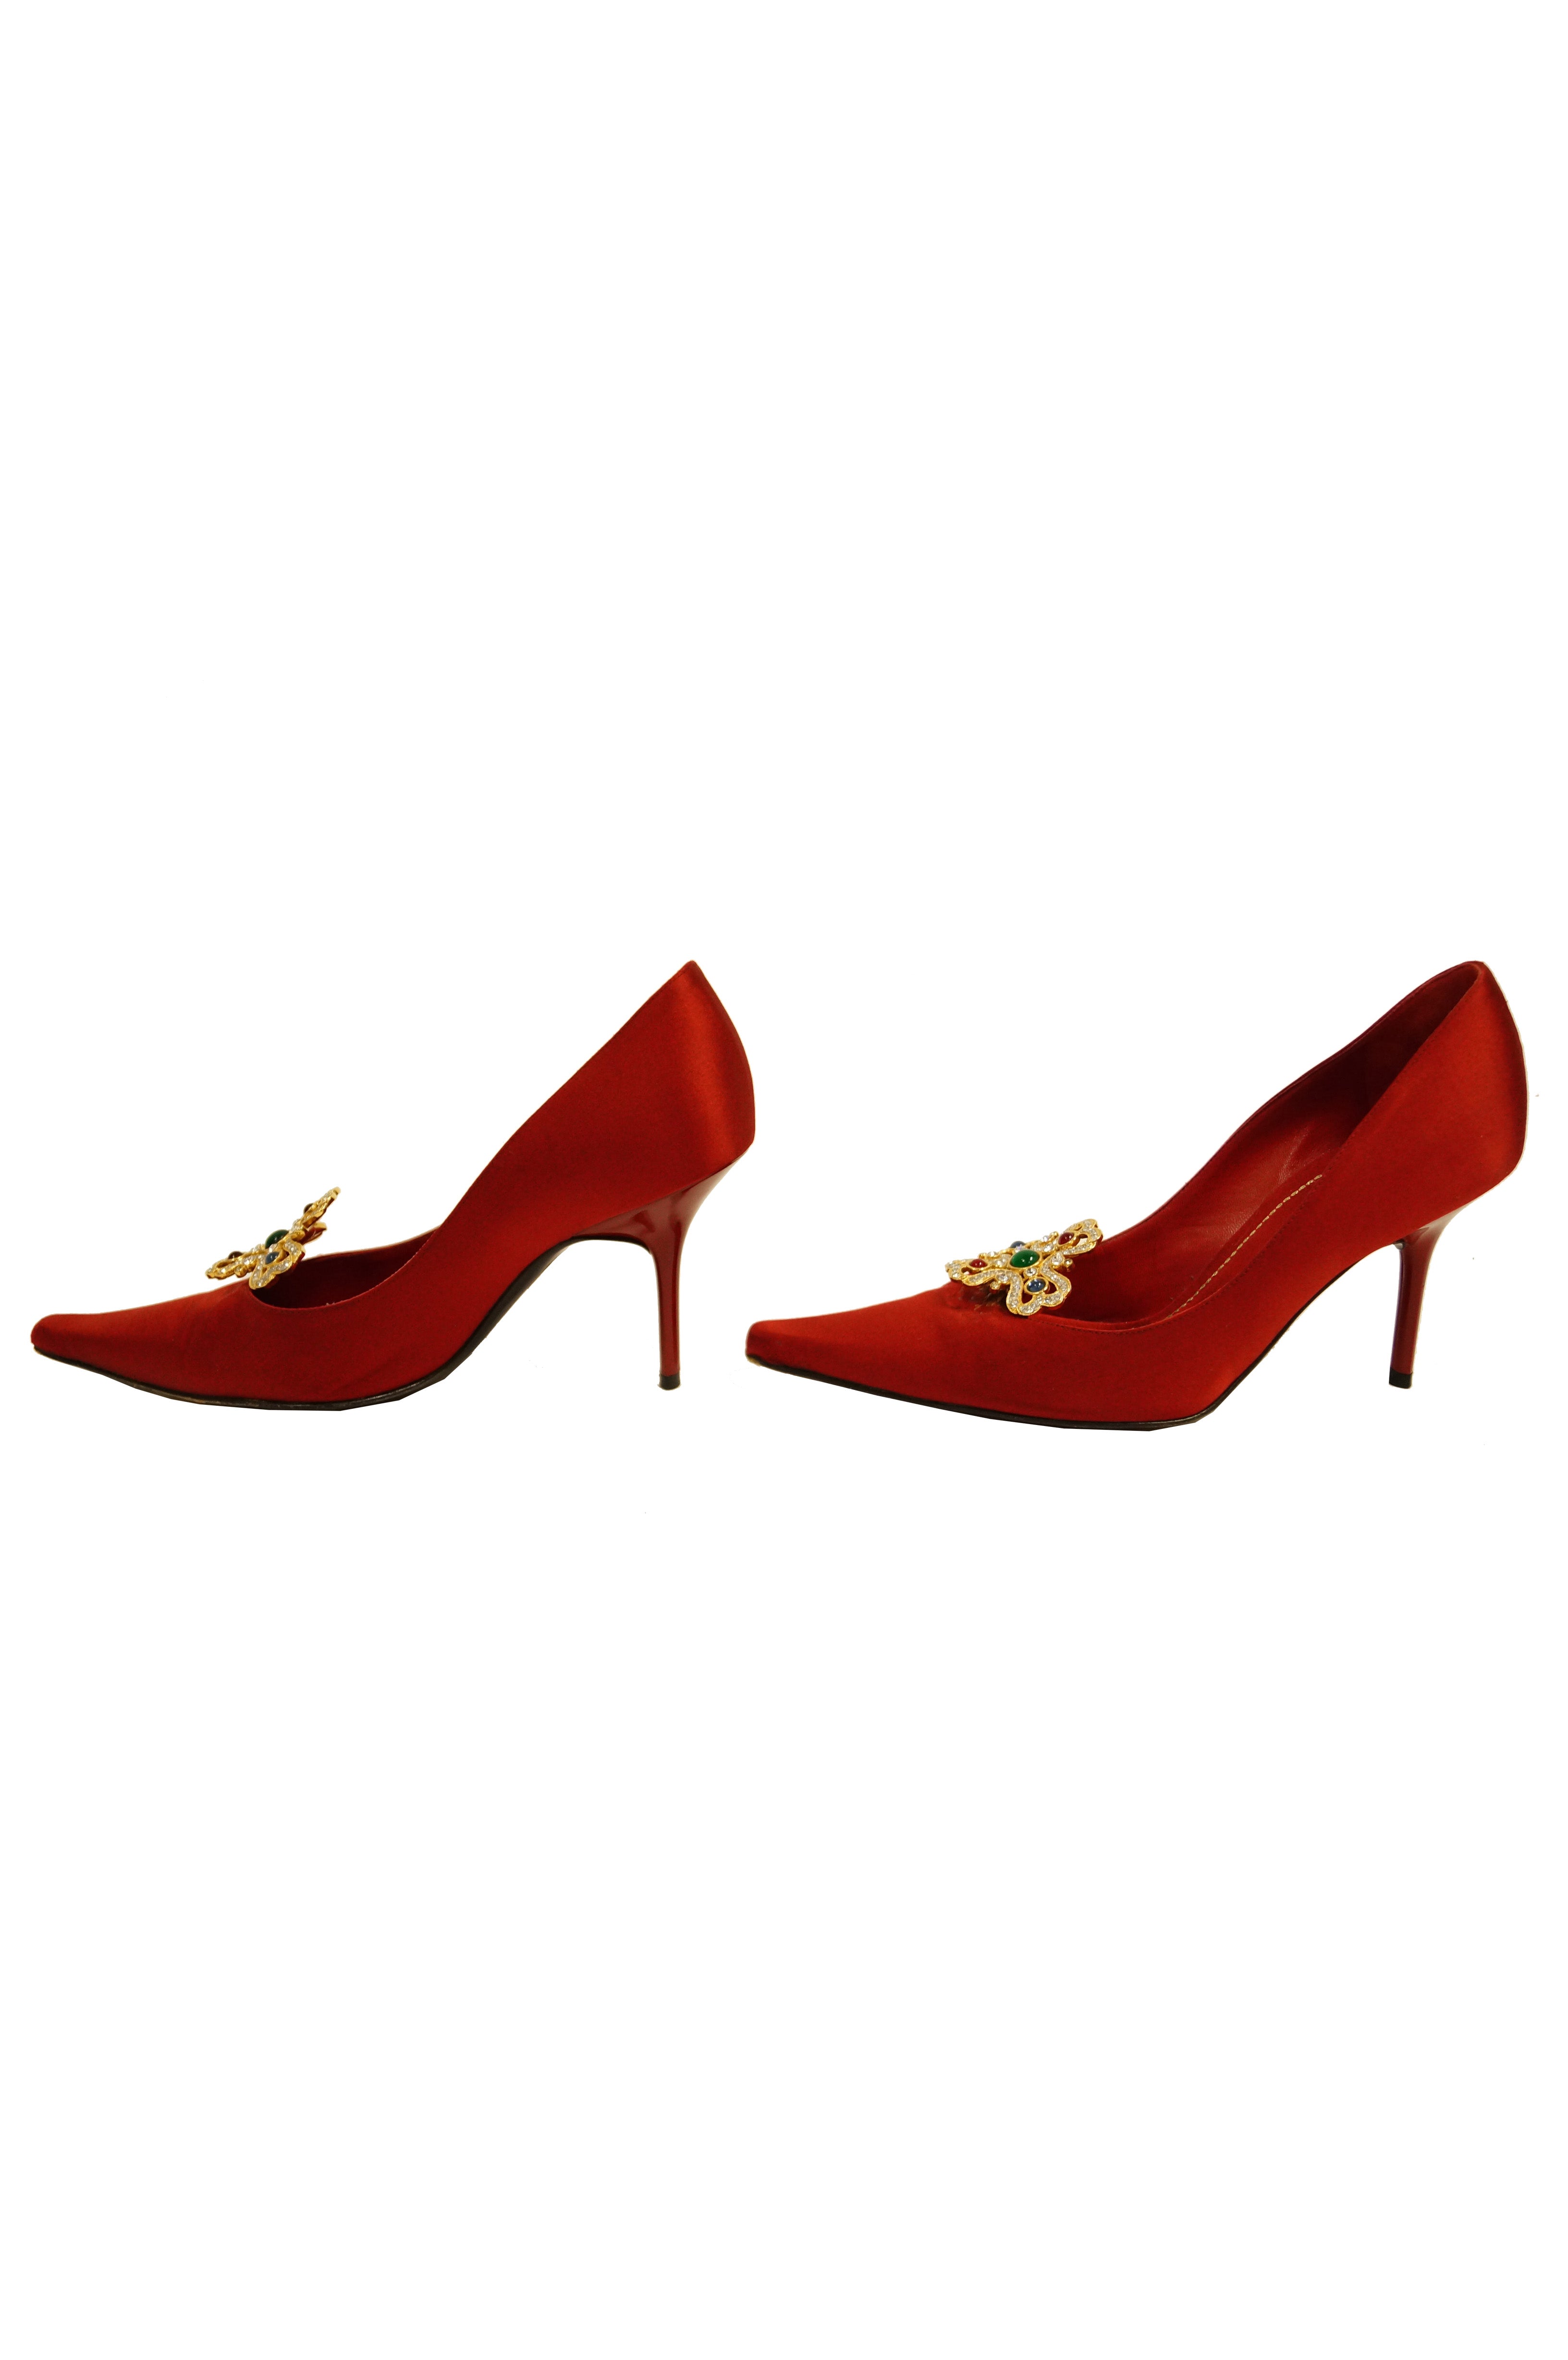 Rene Caovilla Red Satin Pointed Heels with Gold and Rhinestone Accent ...